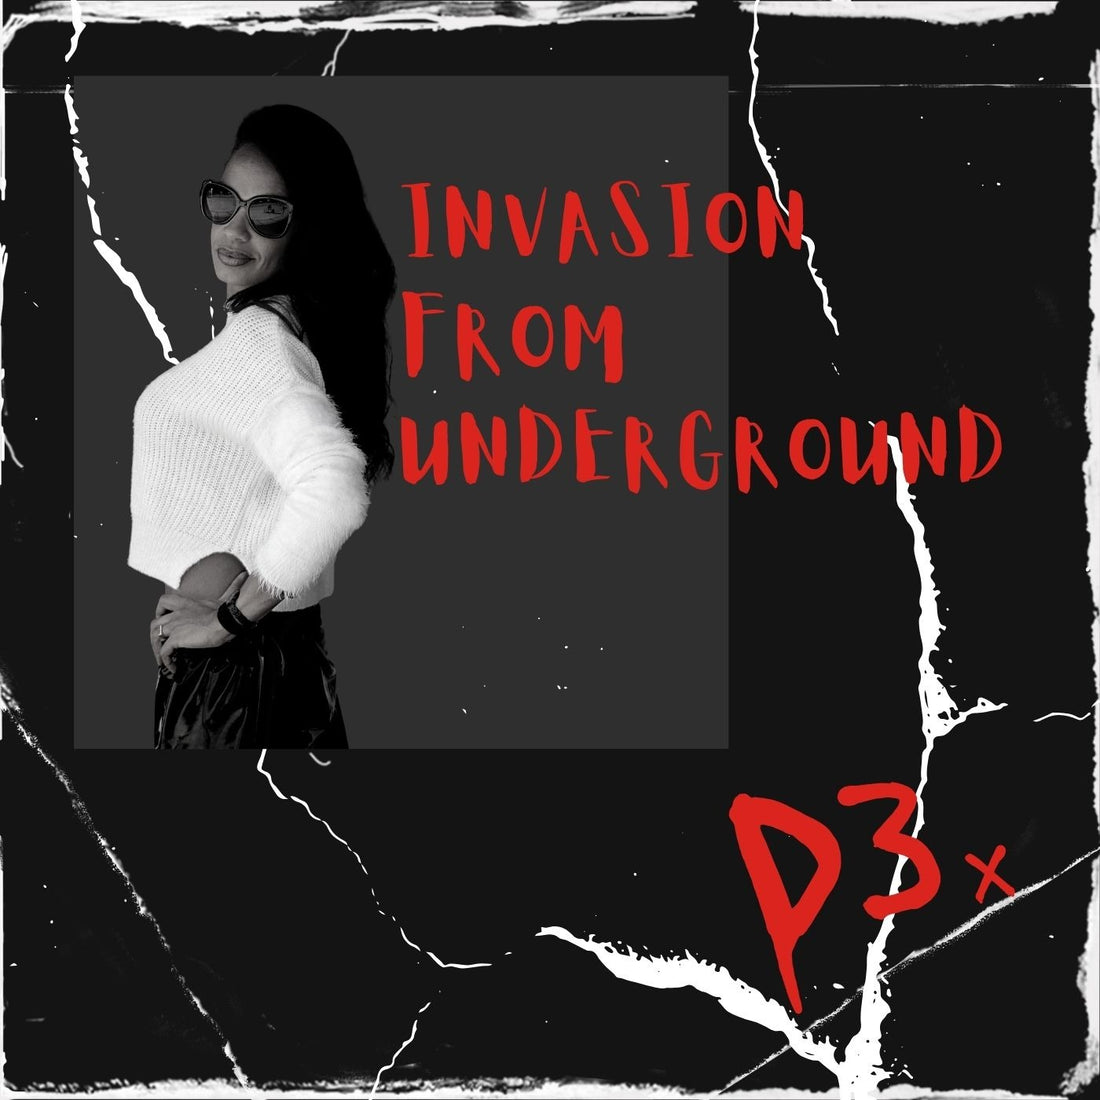 Invasion From Underground: D3 Addresses Gender Inequality in the Music Industry